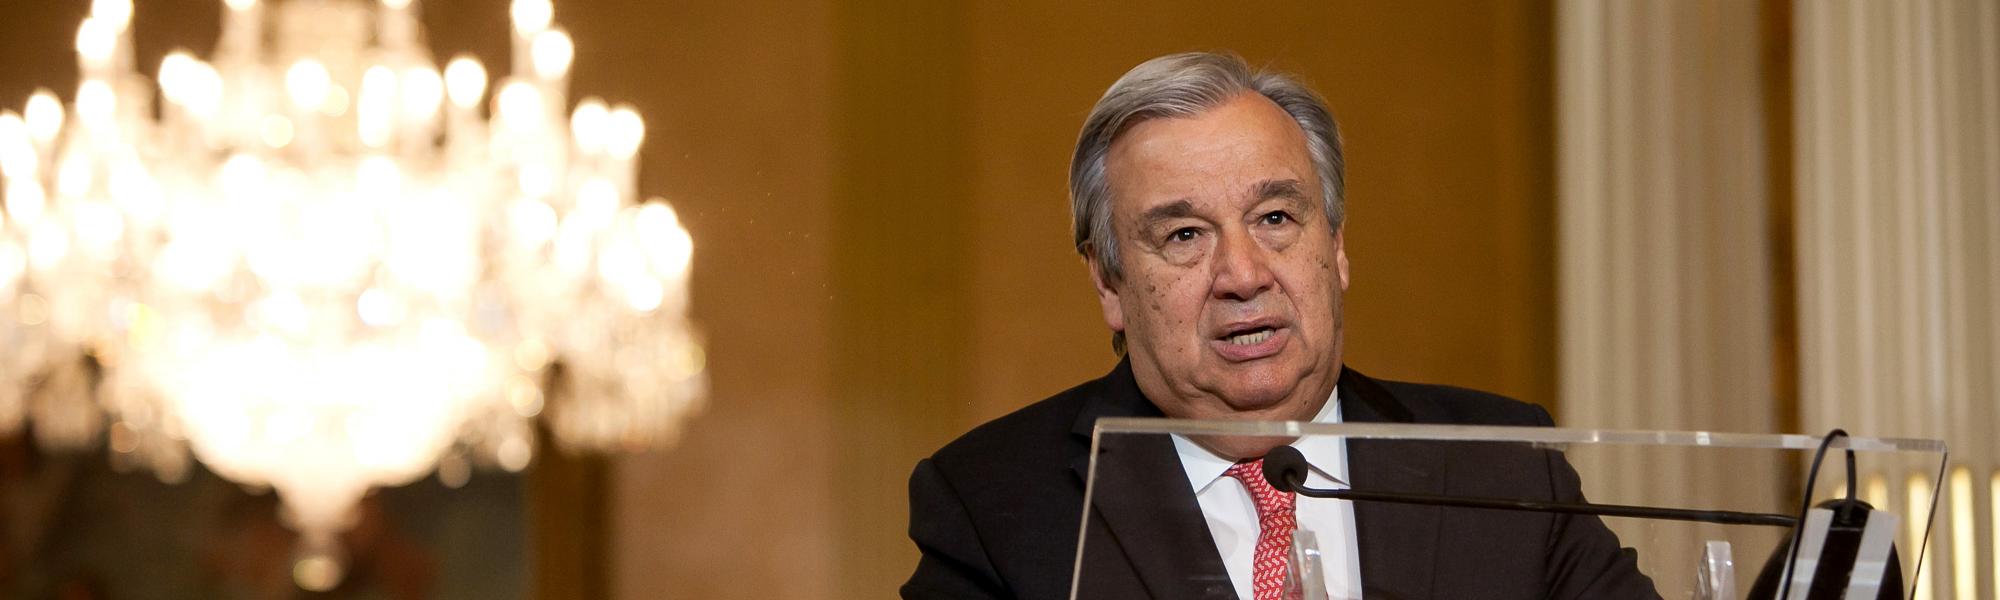 UN Secretary General reminds UN member states of the fundamental role of TIR during COVID-19